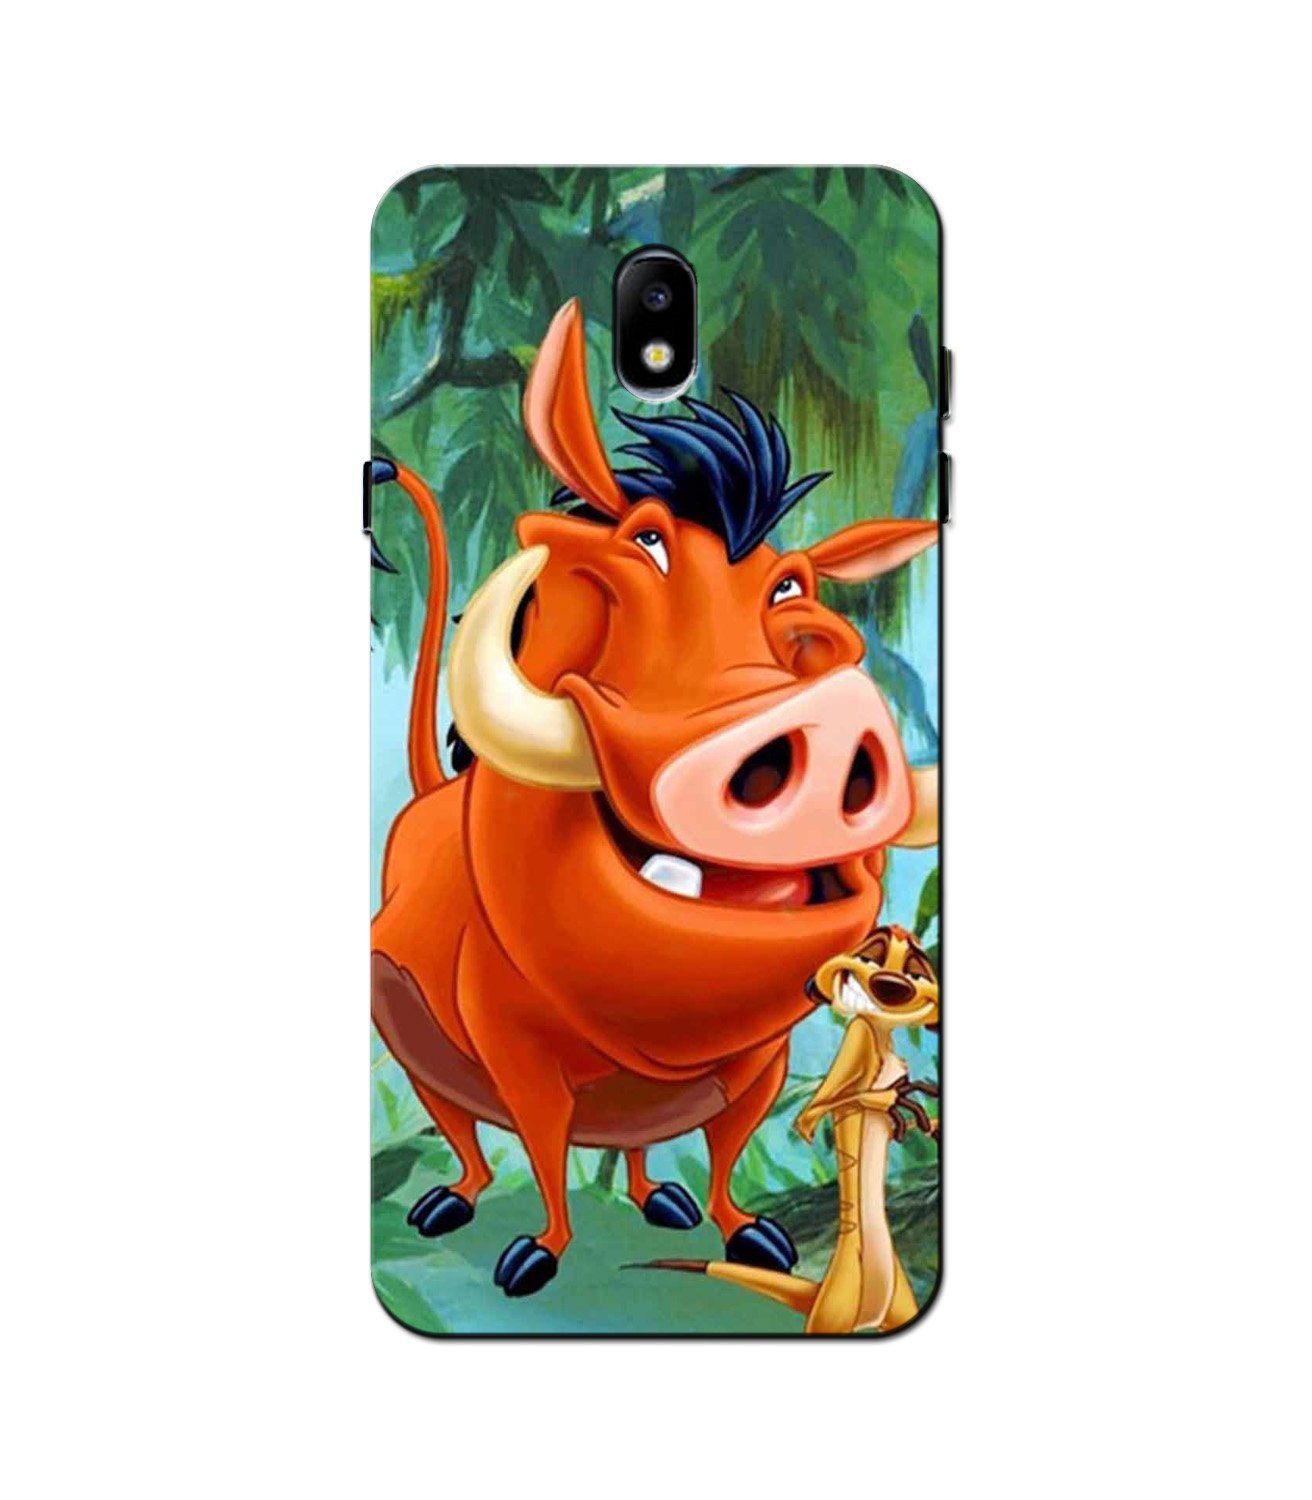 Timon and Pumbaa Mobile Back Case for Galaxy J7 Pro   (Design - 305)